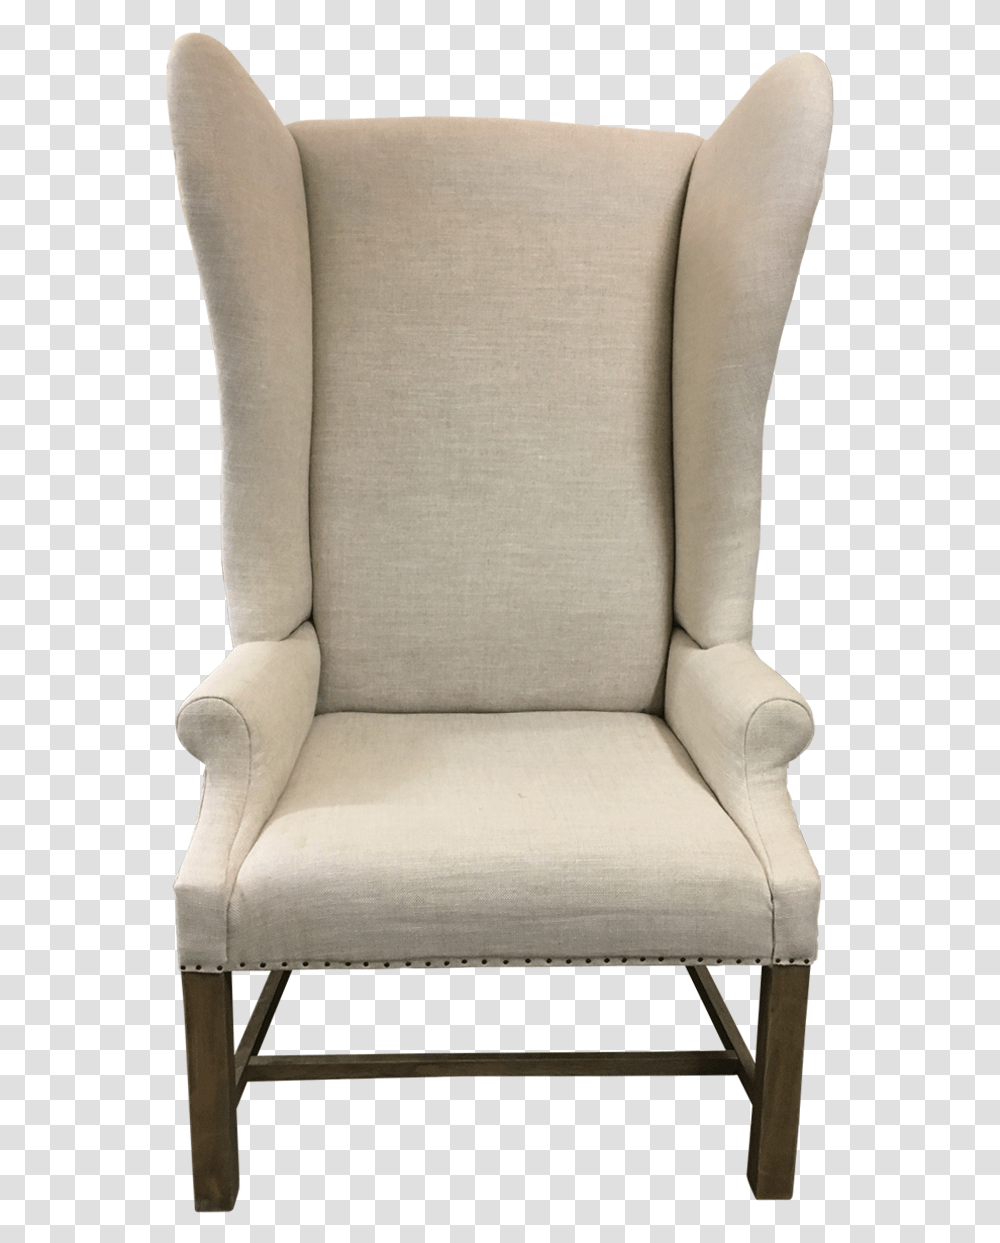 Article With Tag African Club Chair, Furniture, Armchair Transparent Png